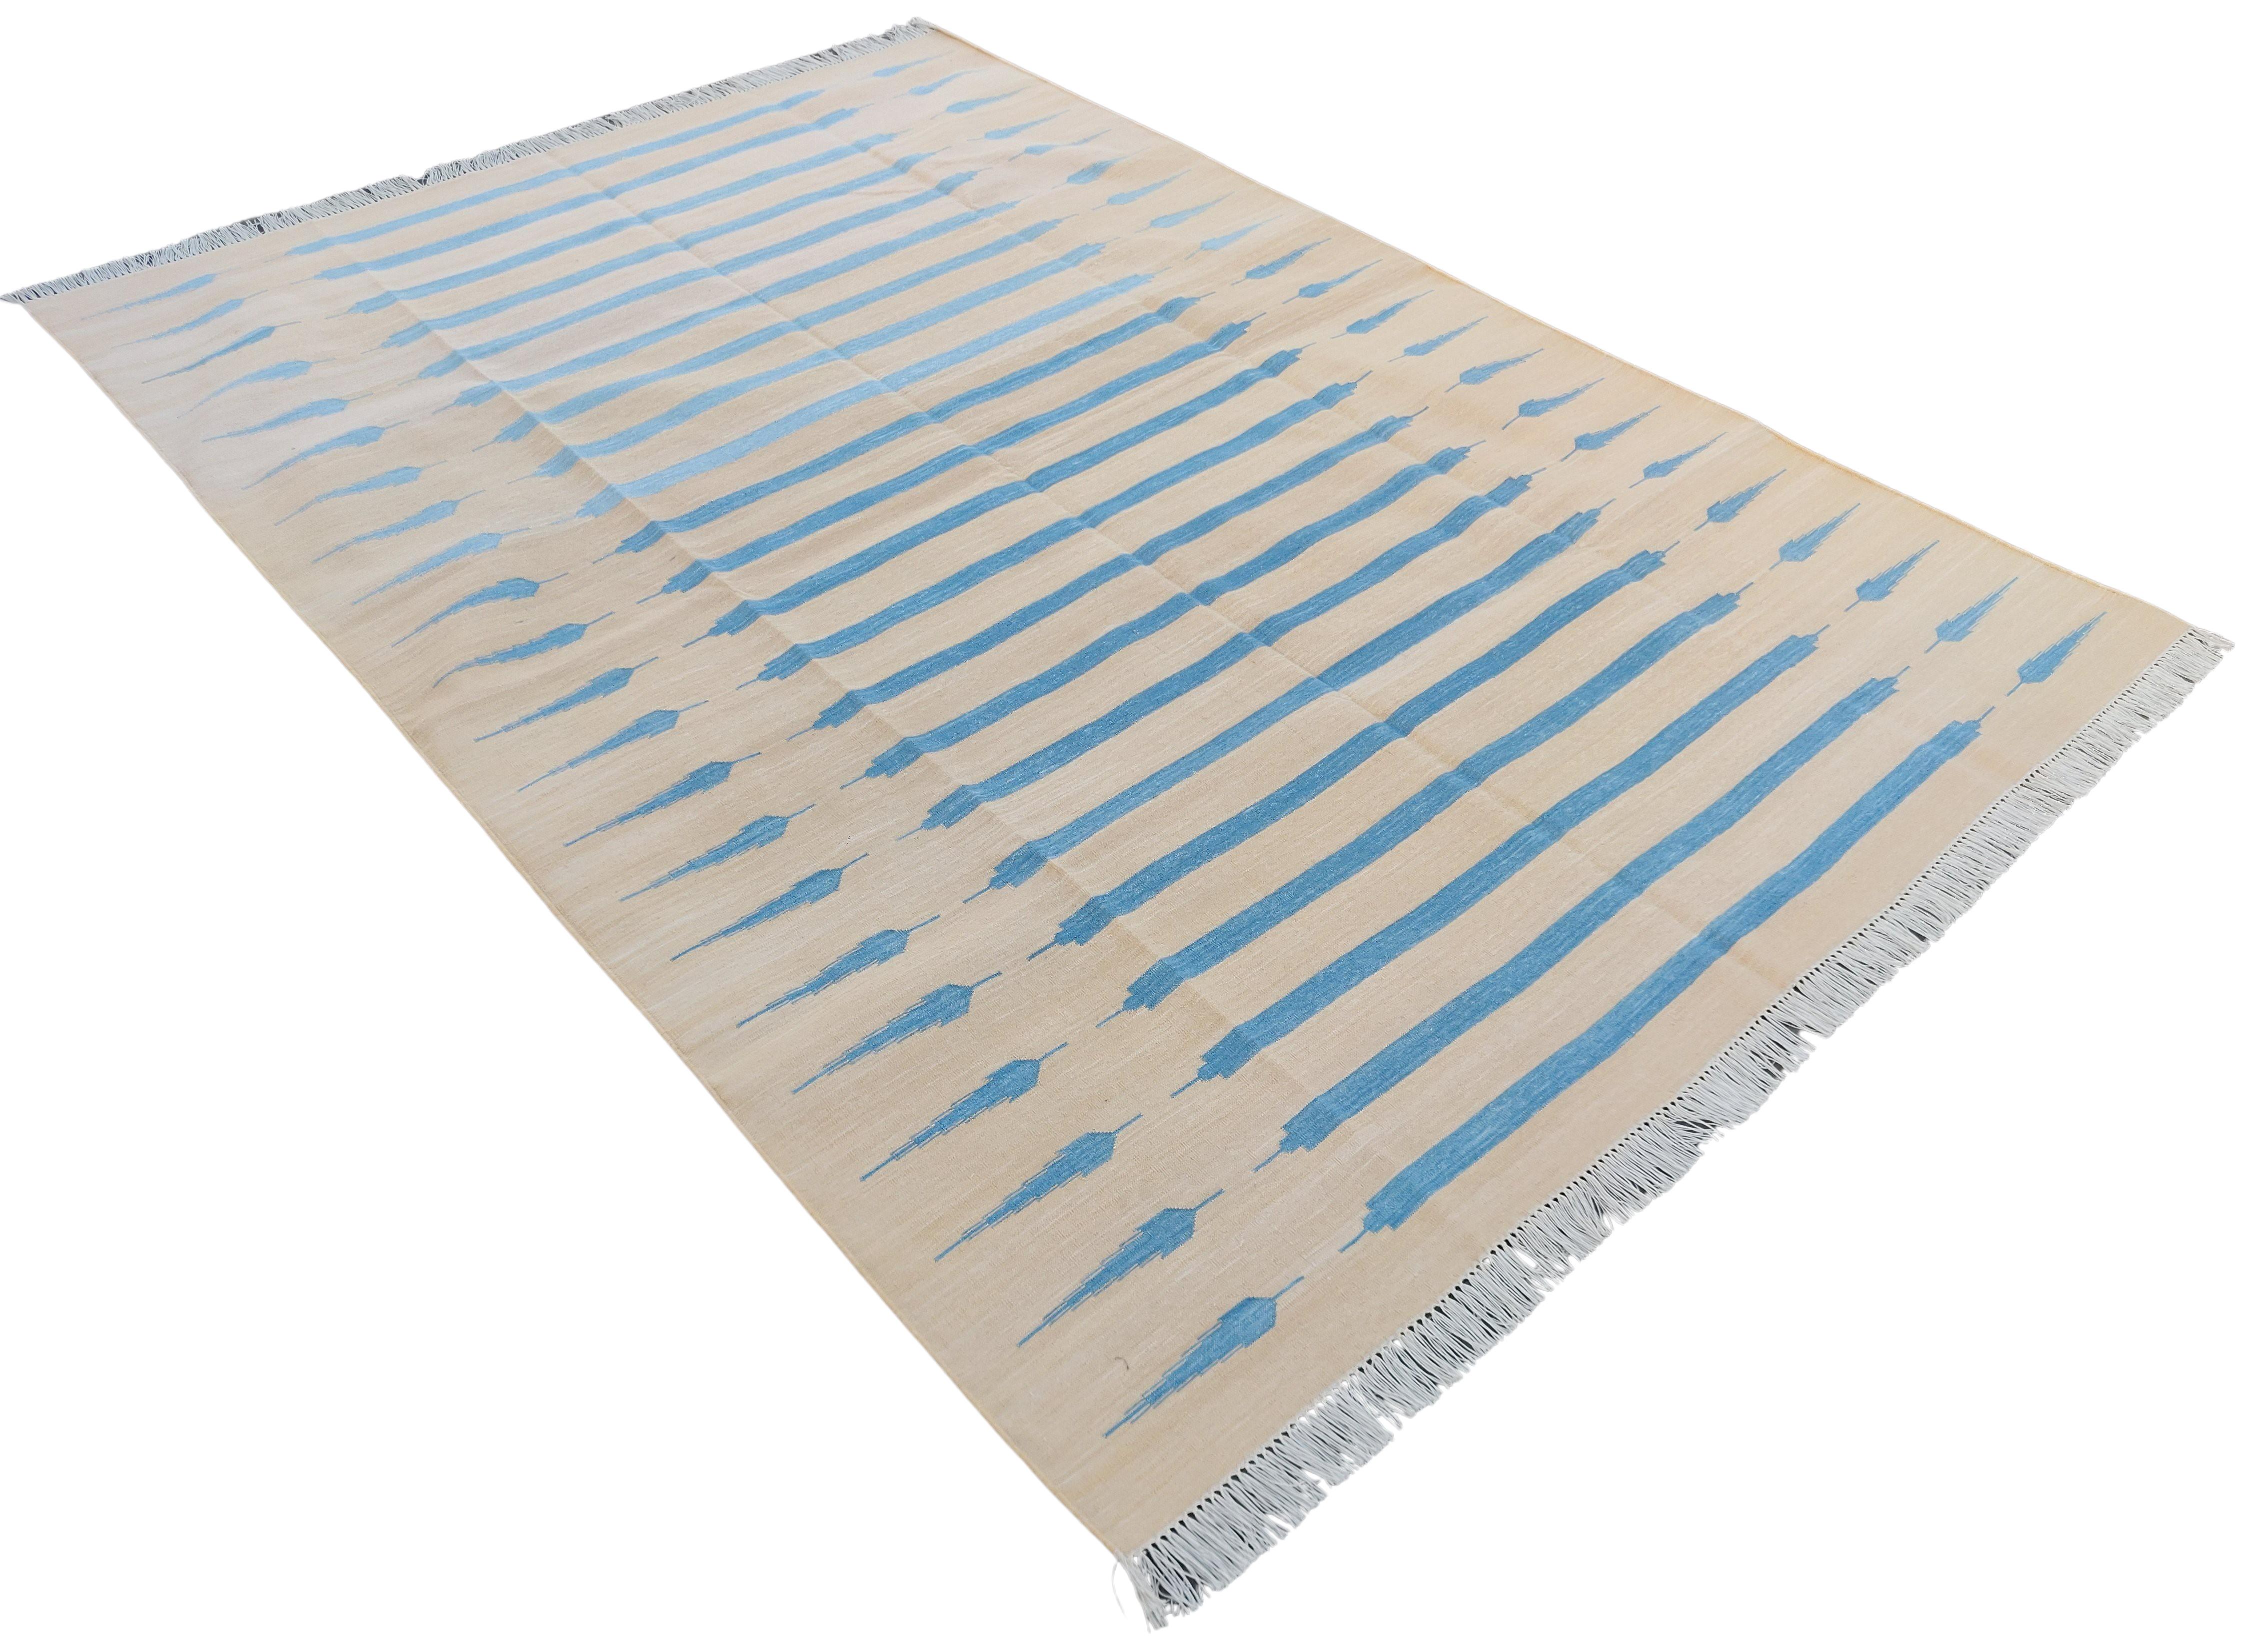 Cotton Vegetable Dyed Cream And Sky Blue Striped Indian Dhurrie Rug-6'x9' 
These special flat-weave dhurries are hand-woven with 15 ply 100% cotton yarn. Due to the special manufacturing techniques used to create our rugs, the size and color of each